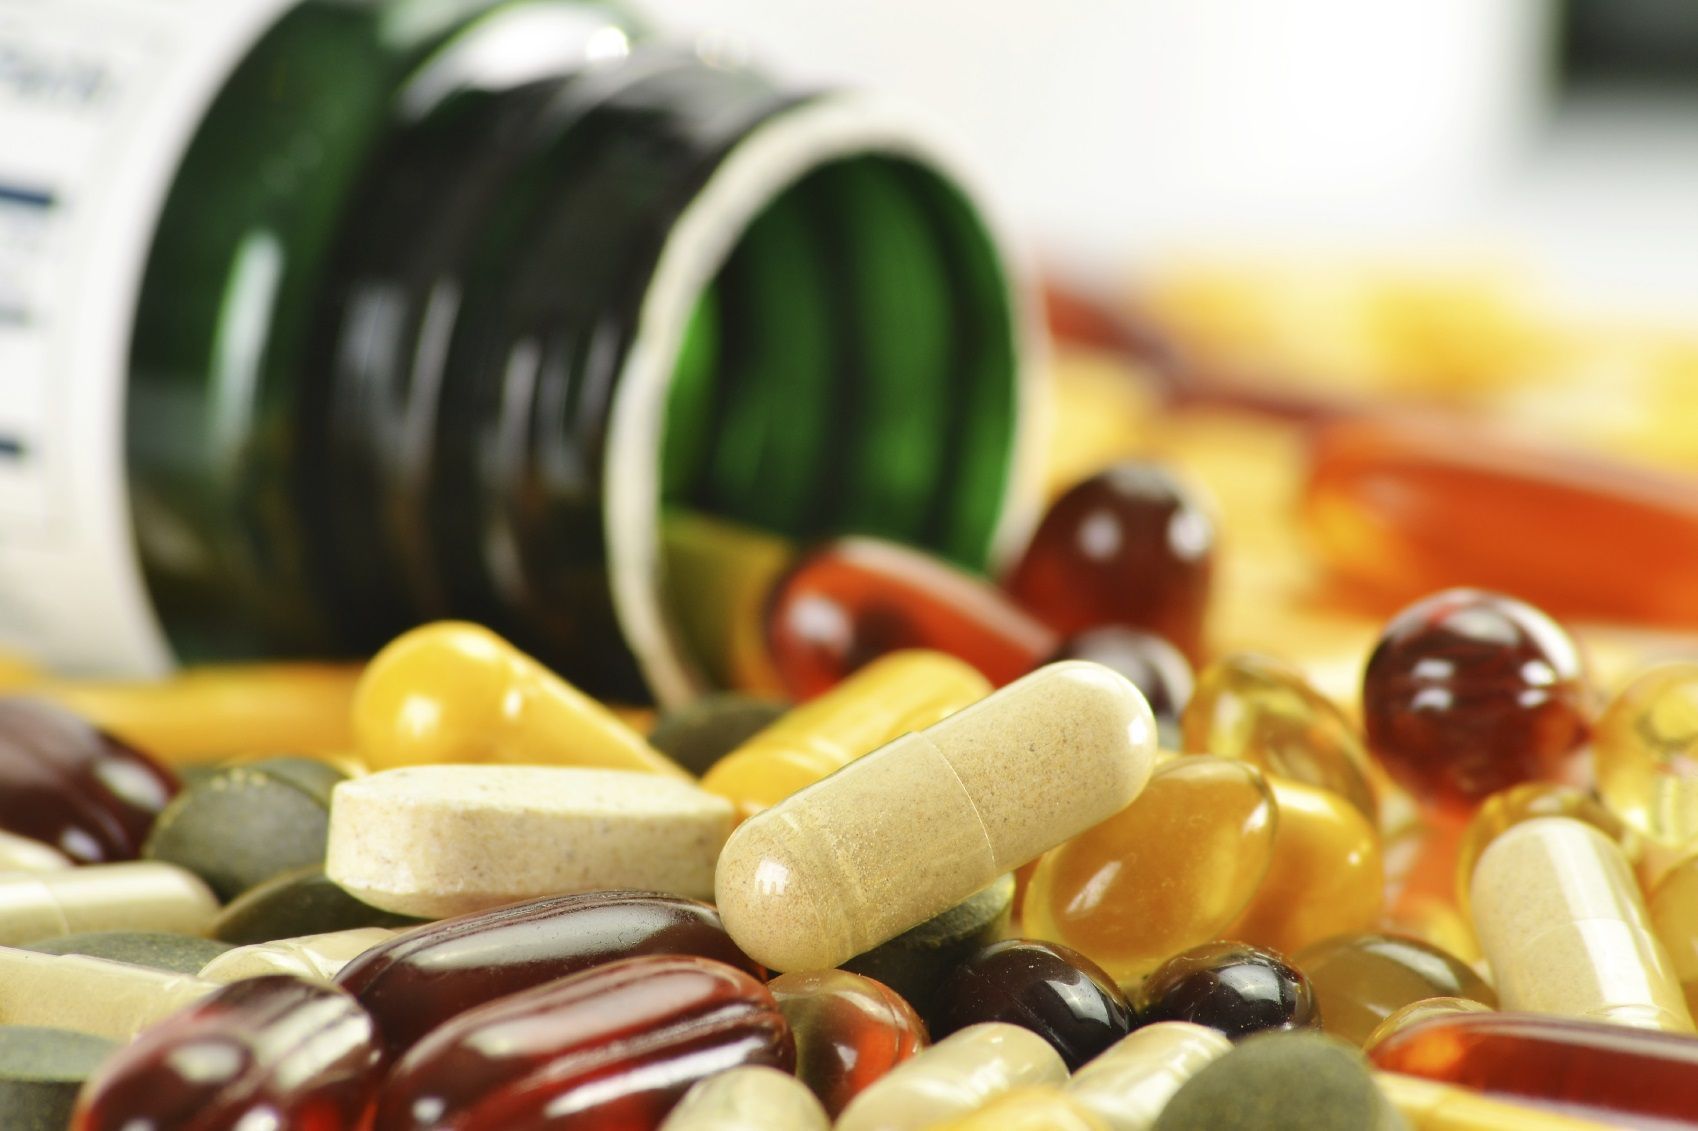 Are good the supplements for you health?